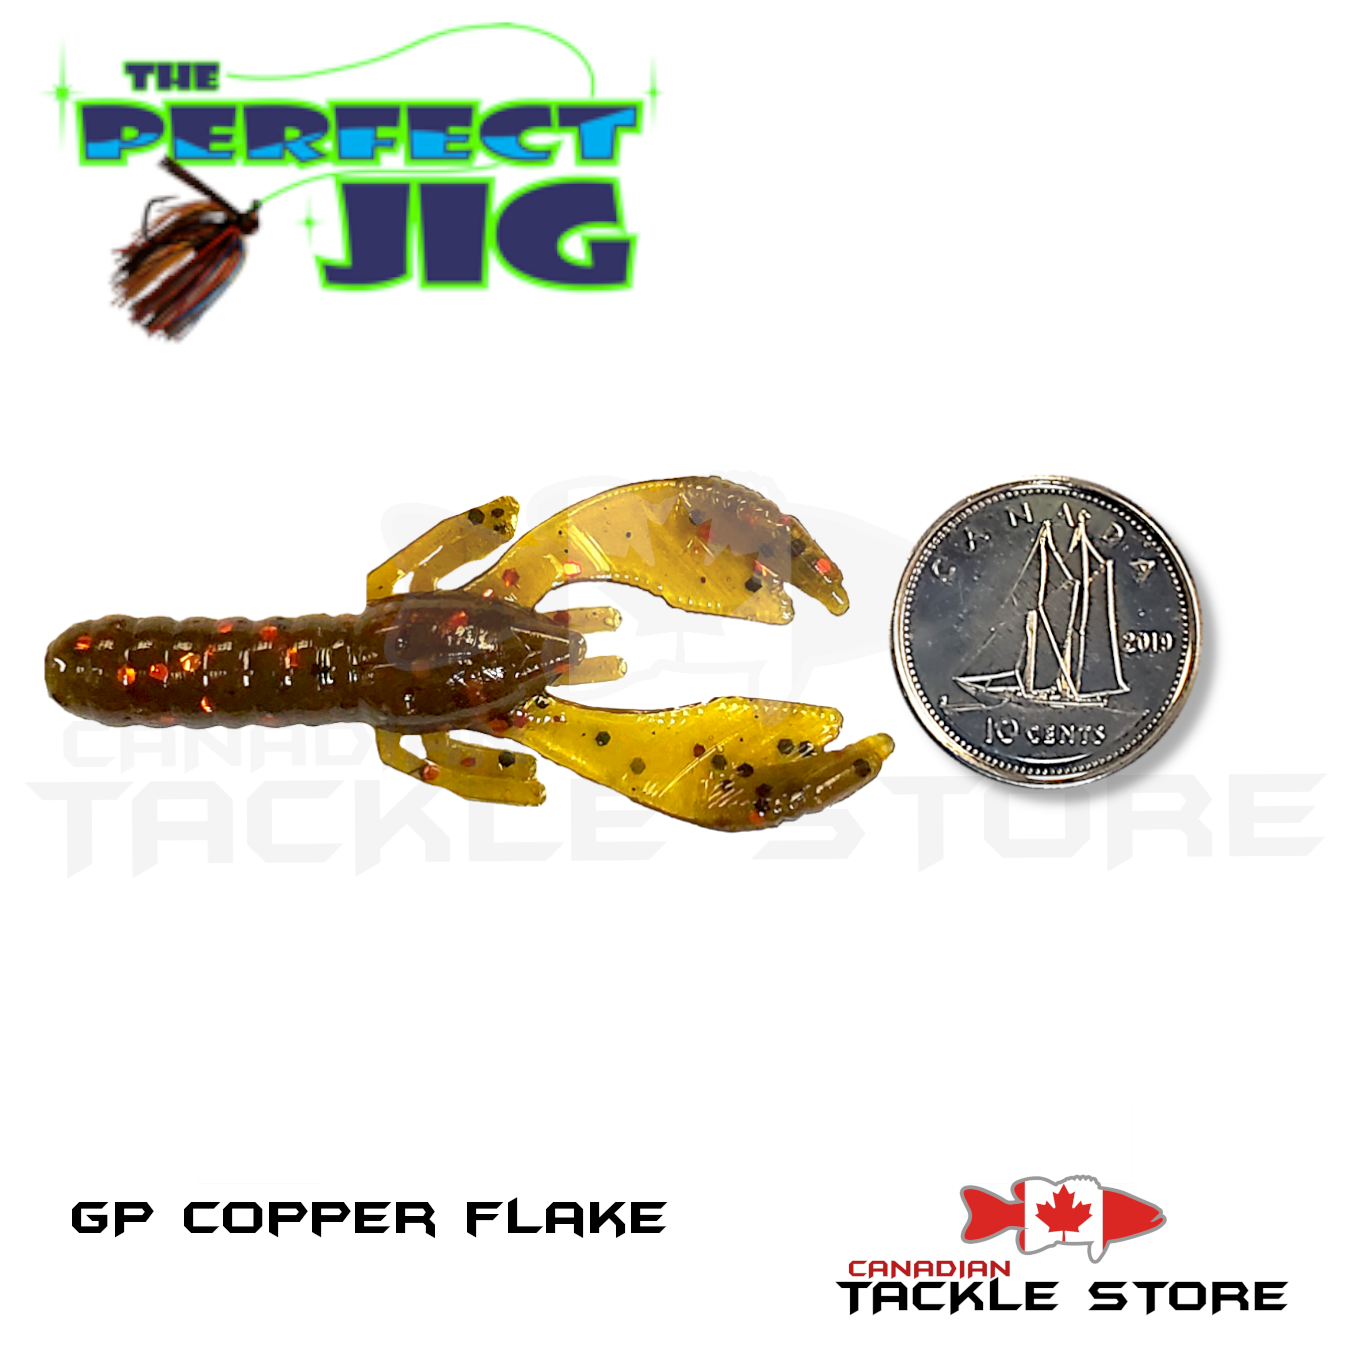 SET THE HOOK DRIFTERS WITH BAIT FUEL – Canadian Tackle Store